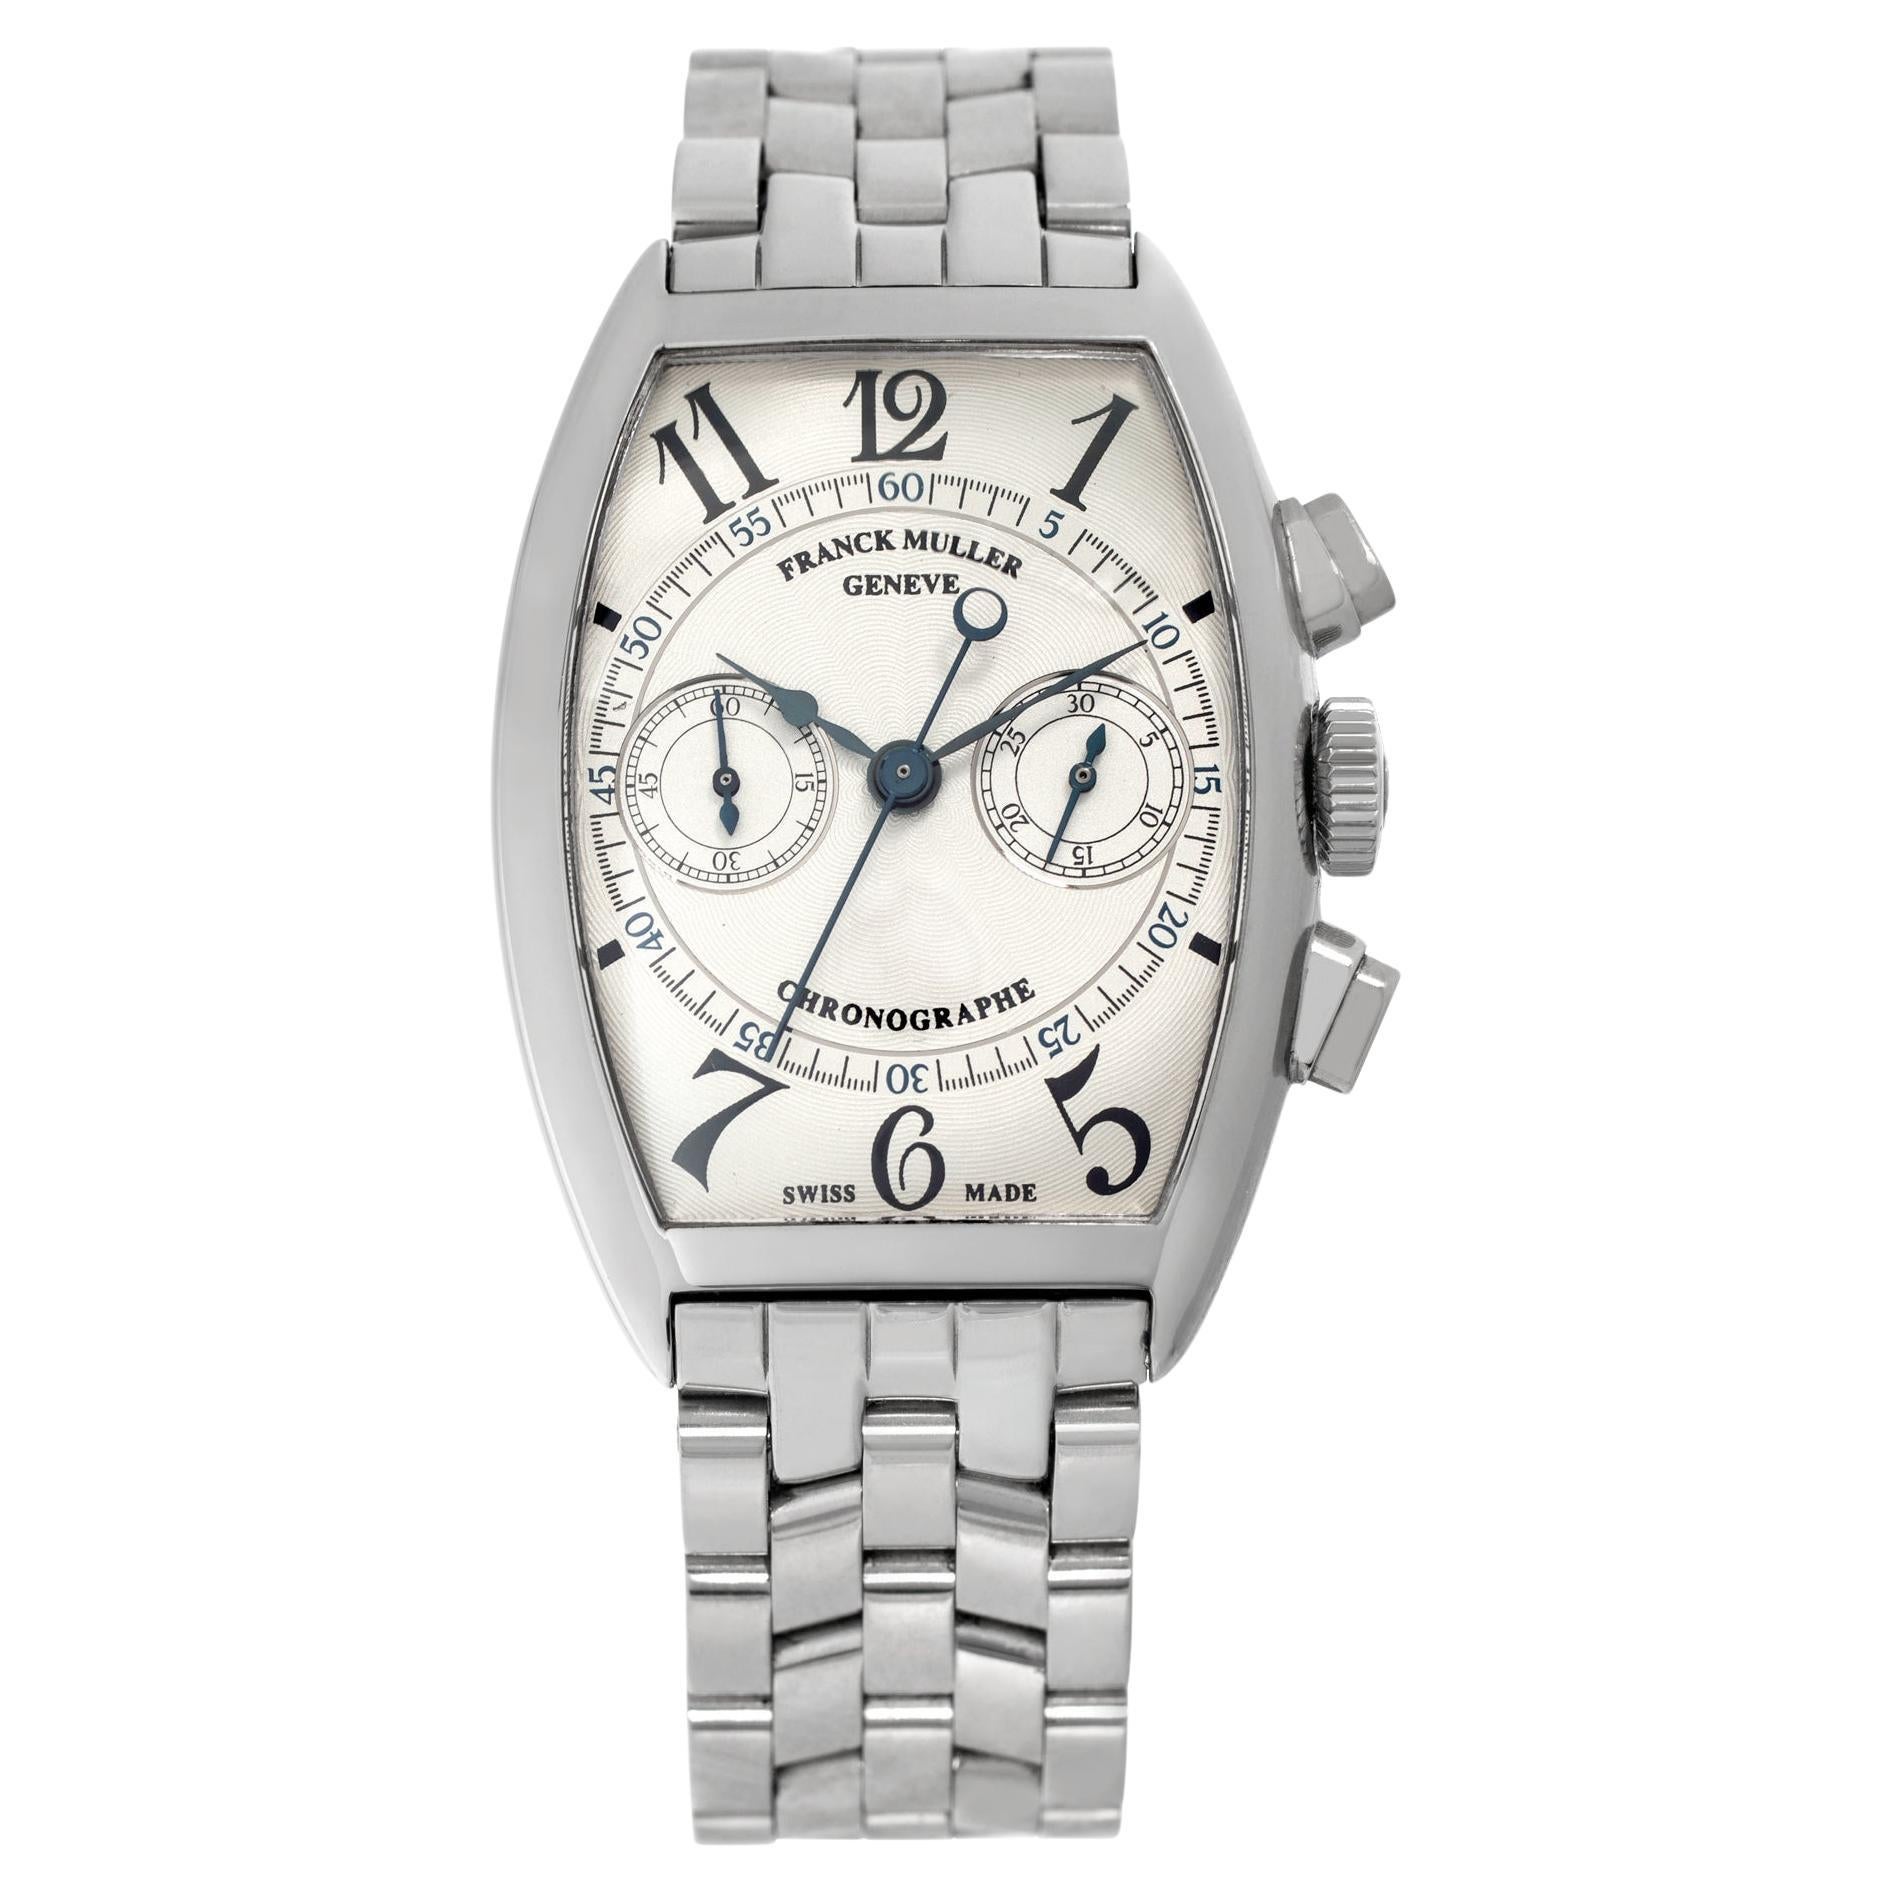 Franck Muller Casablanc5850 CC  Stainless Steel w/ White dial 39mm watch